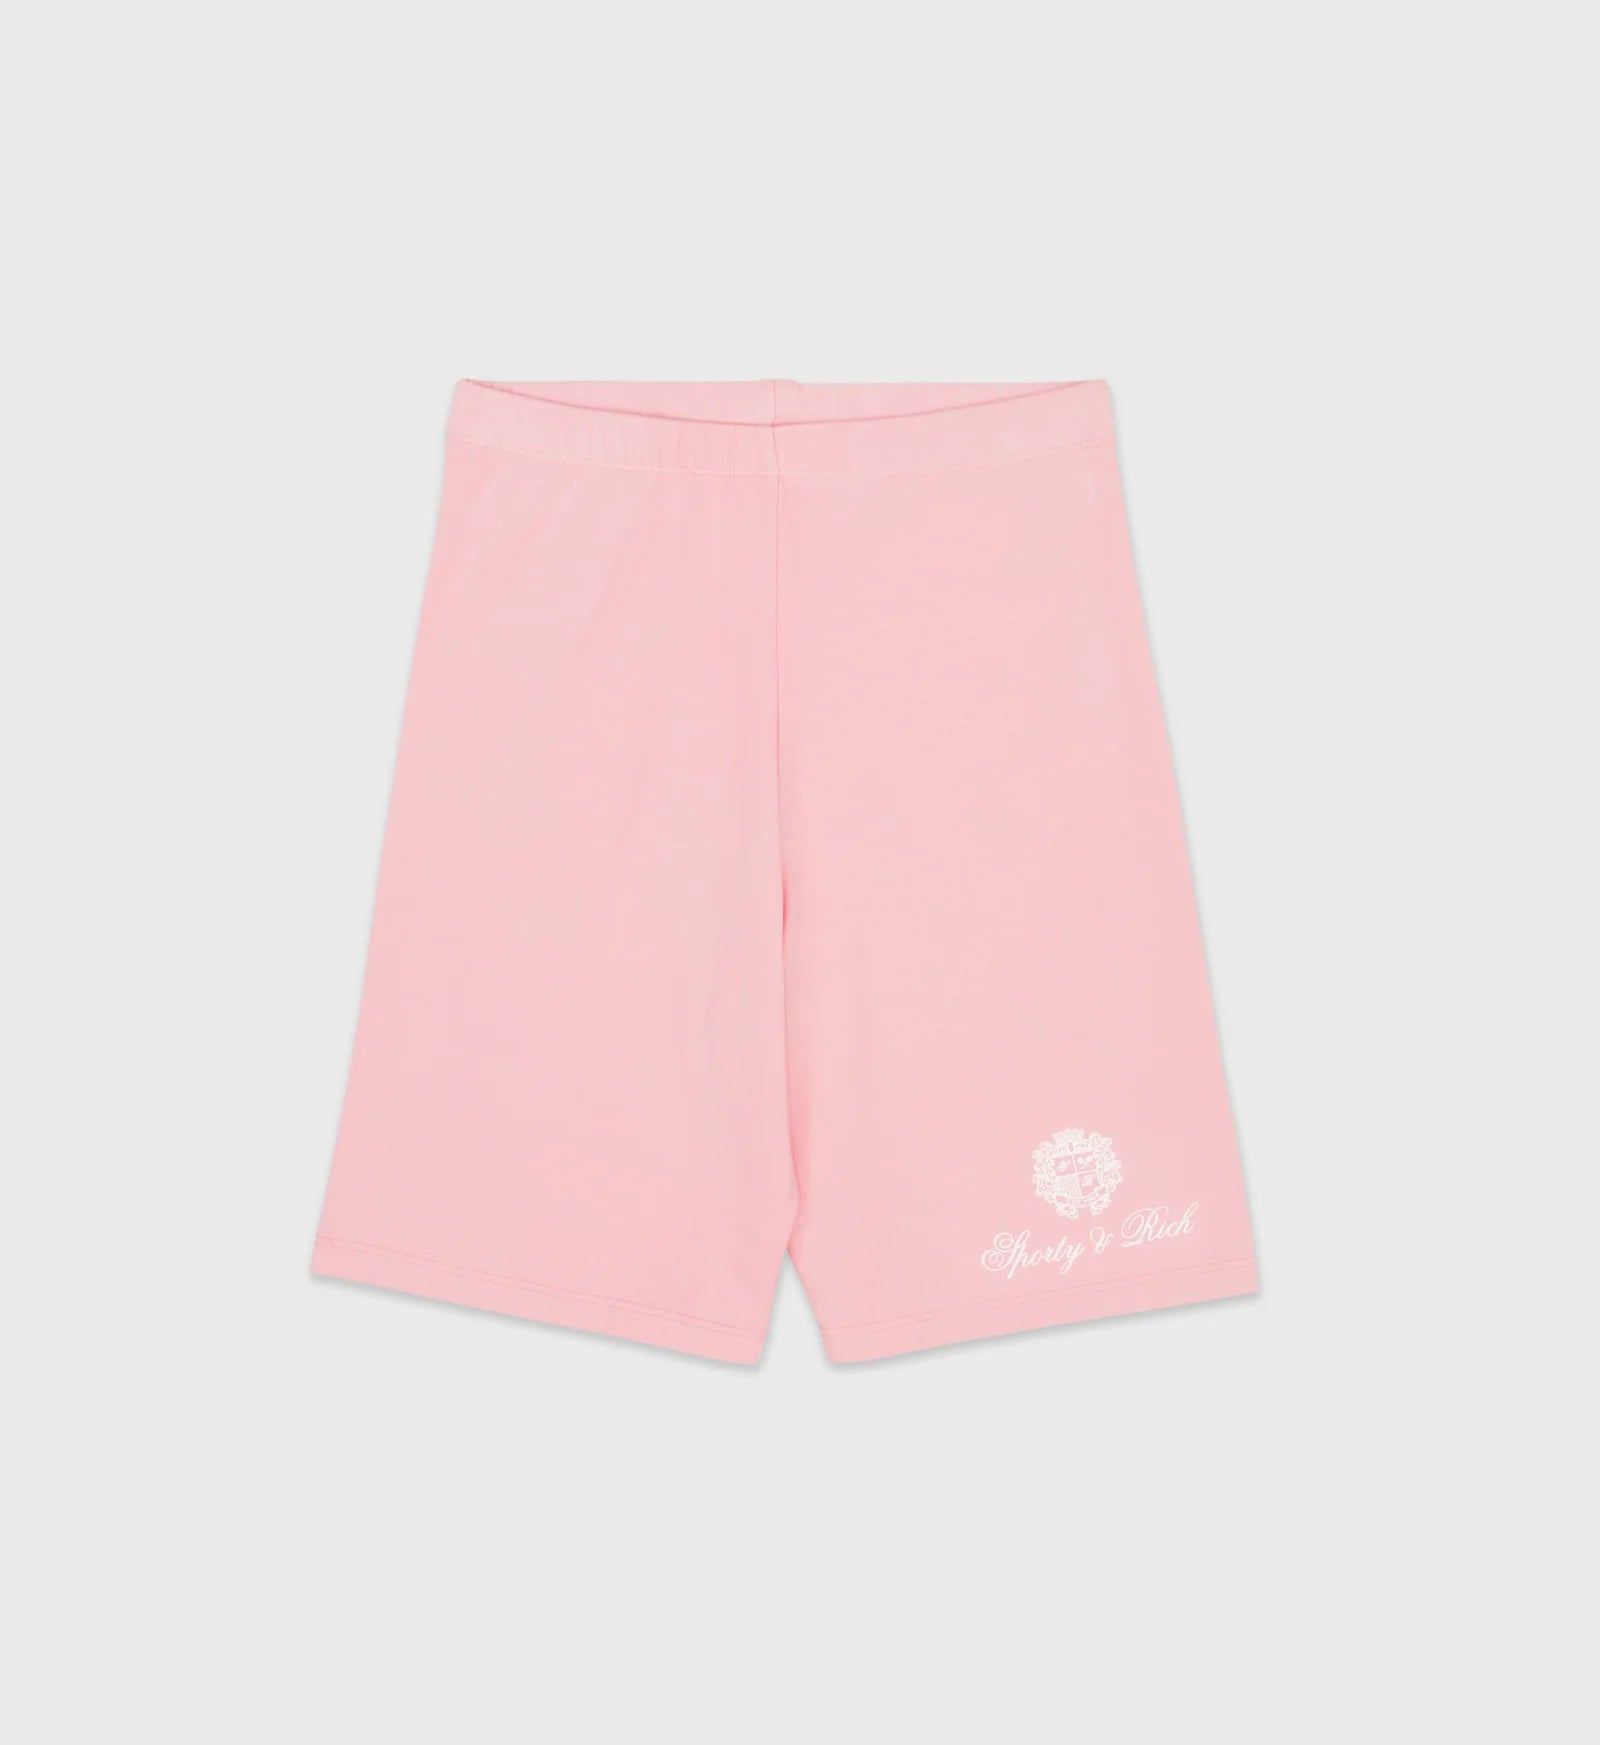 Country Crest Biker Cycling Short